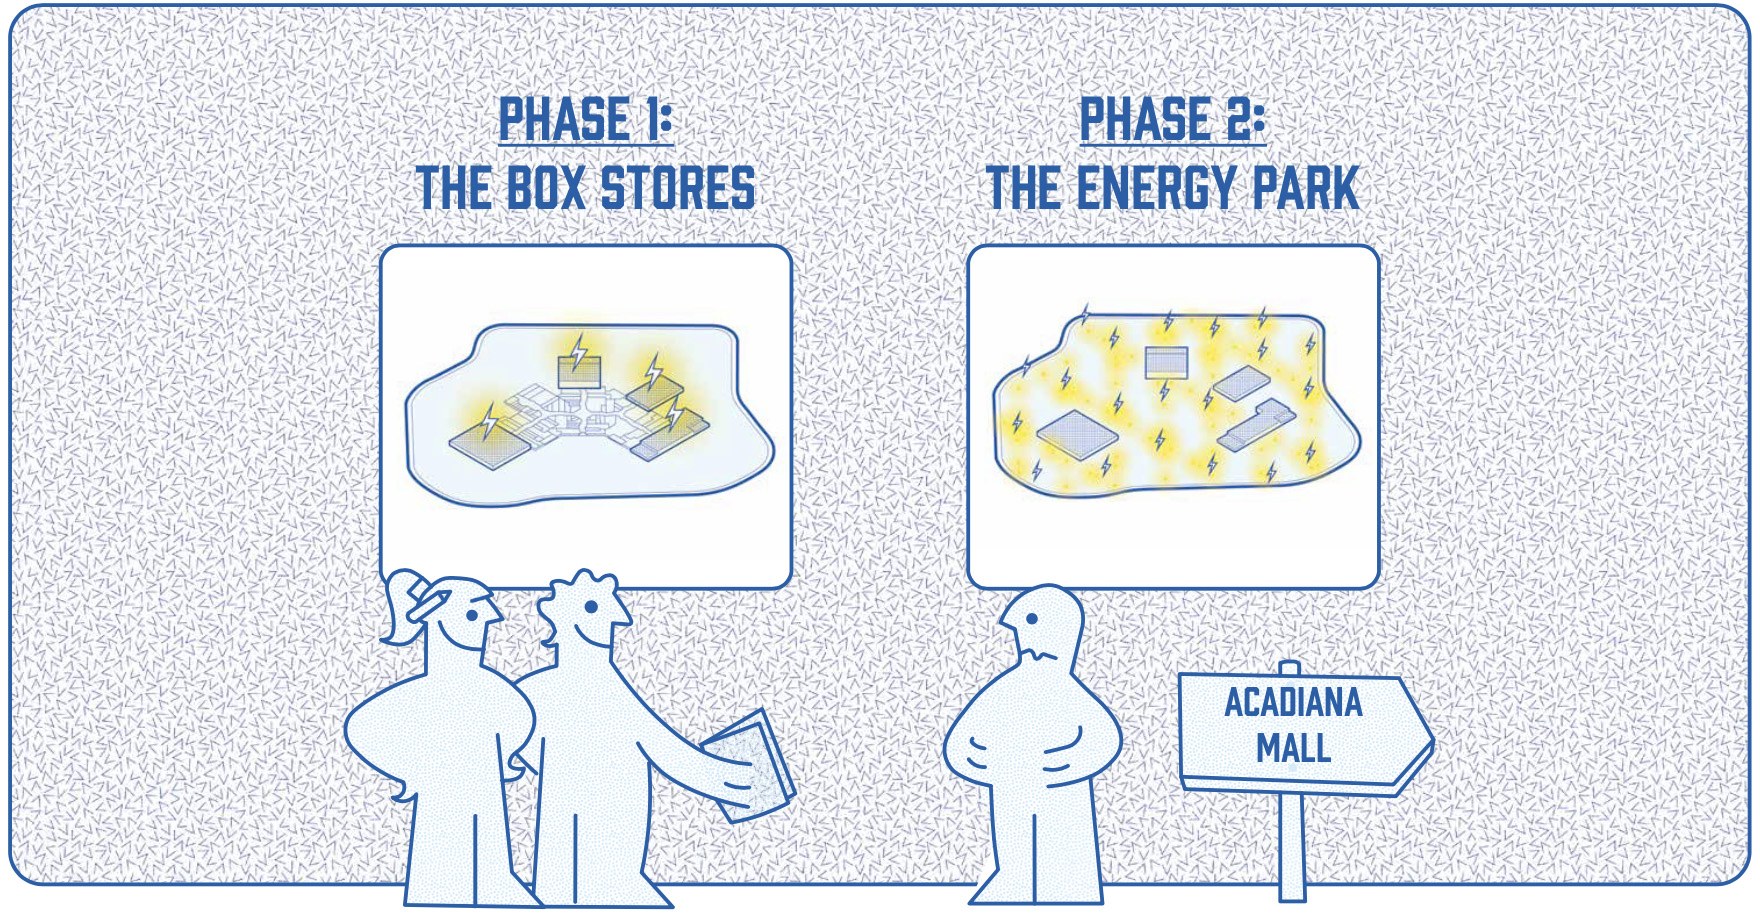 Connor Little and Merrie Afseth's thesis: diagram illustrating phase 1 (box stores) and phase 2 (energy park)